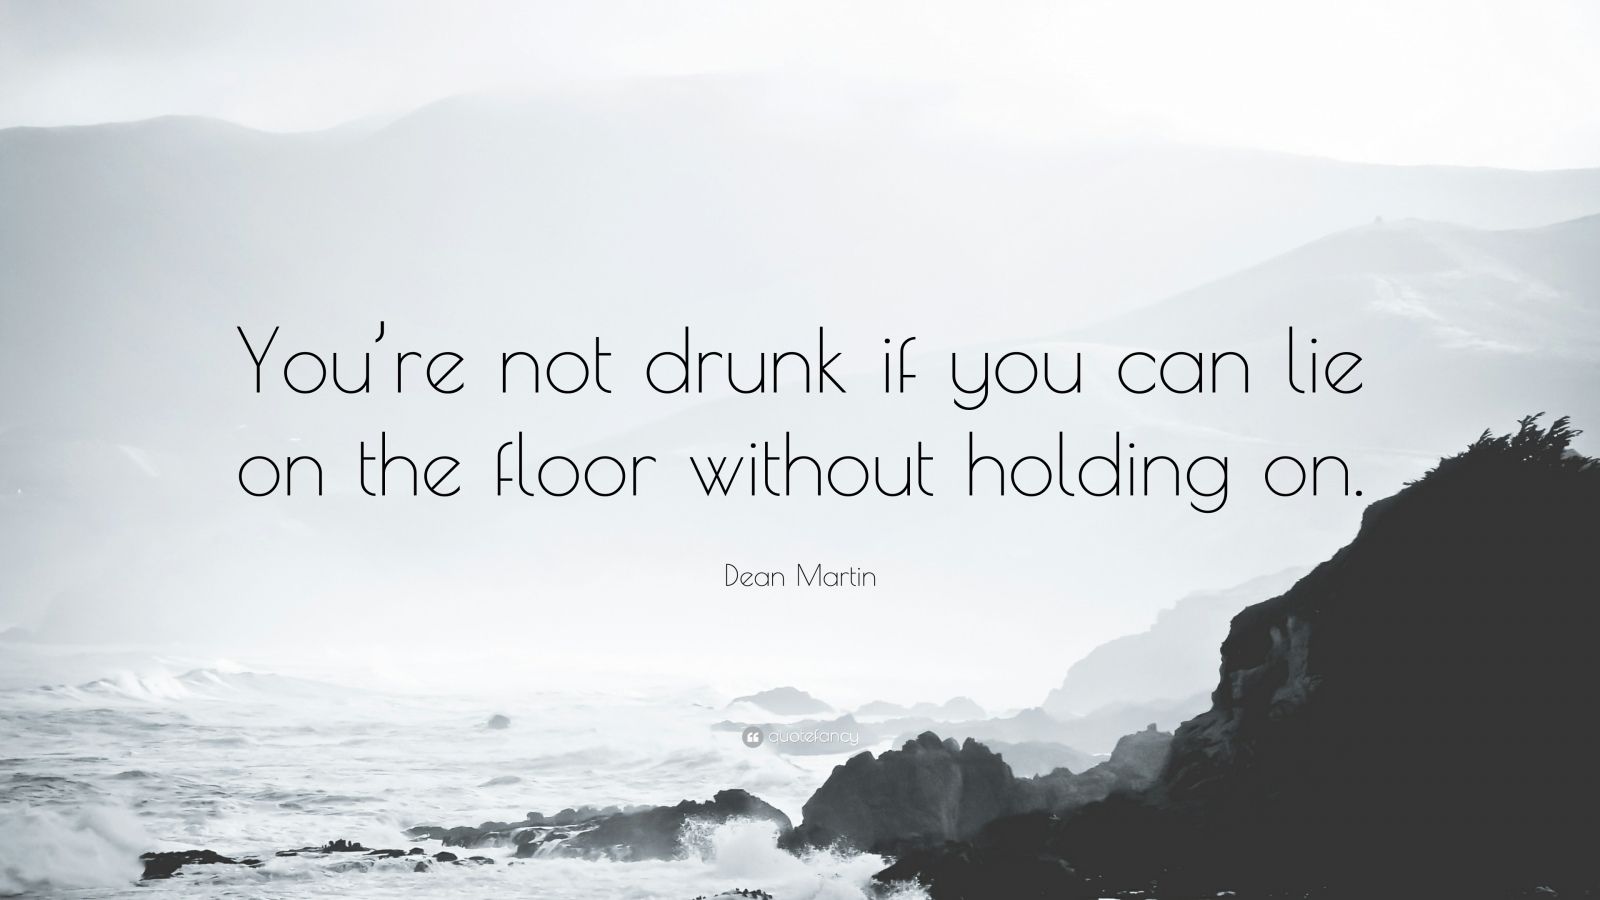 Dean Martin Quote: “You’re not drunk if you can lie on the floor without holding on.”